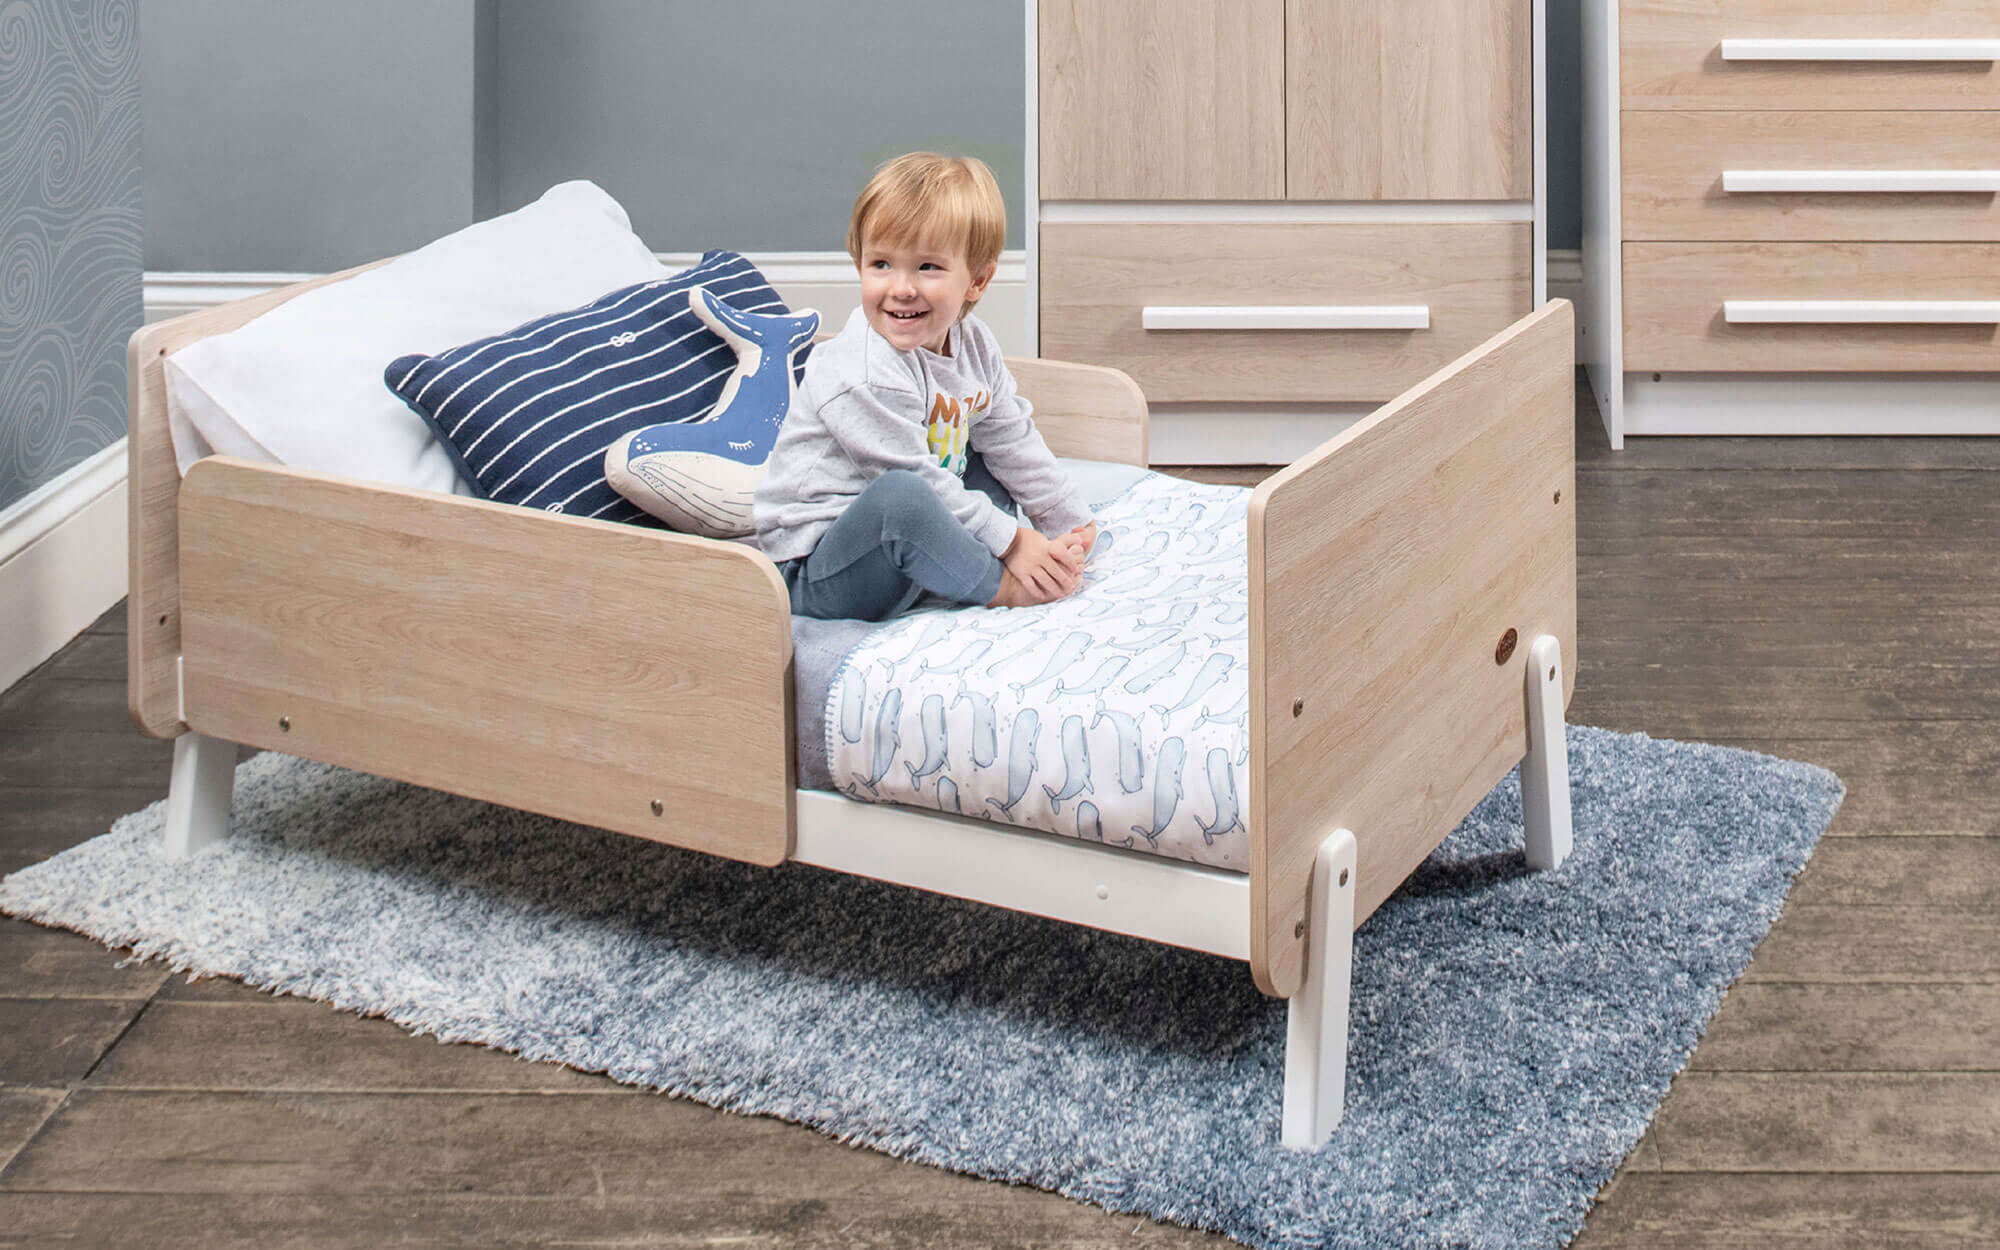 Toddler in toddler bed with guard panel